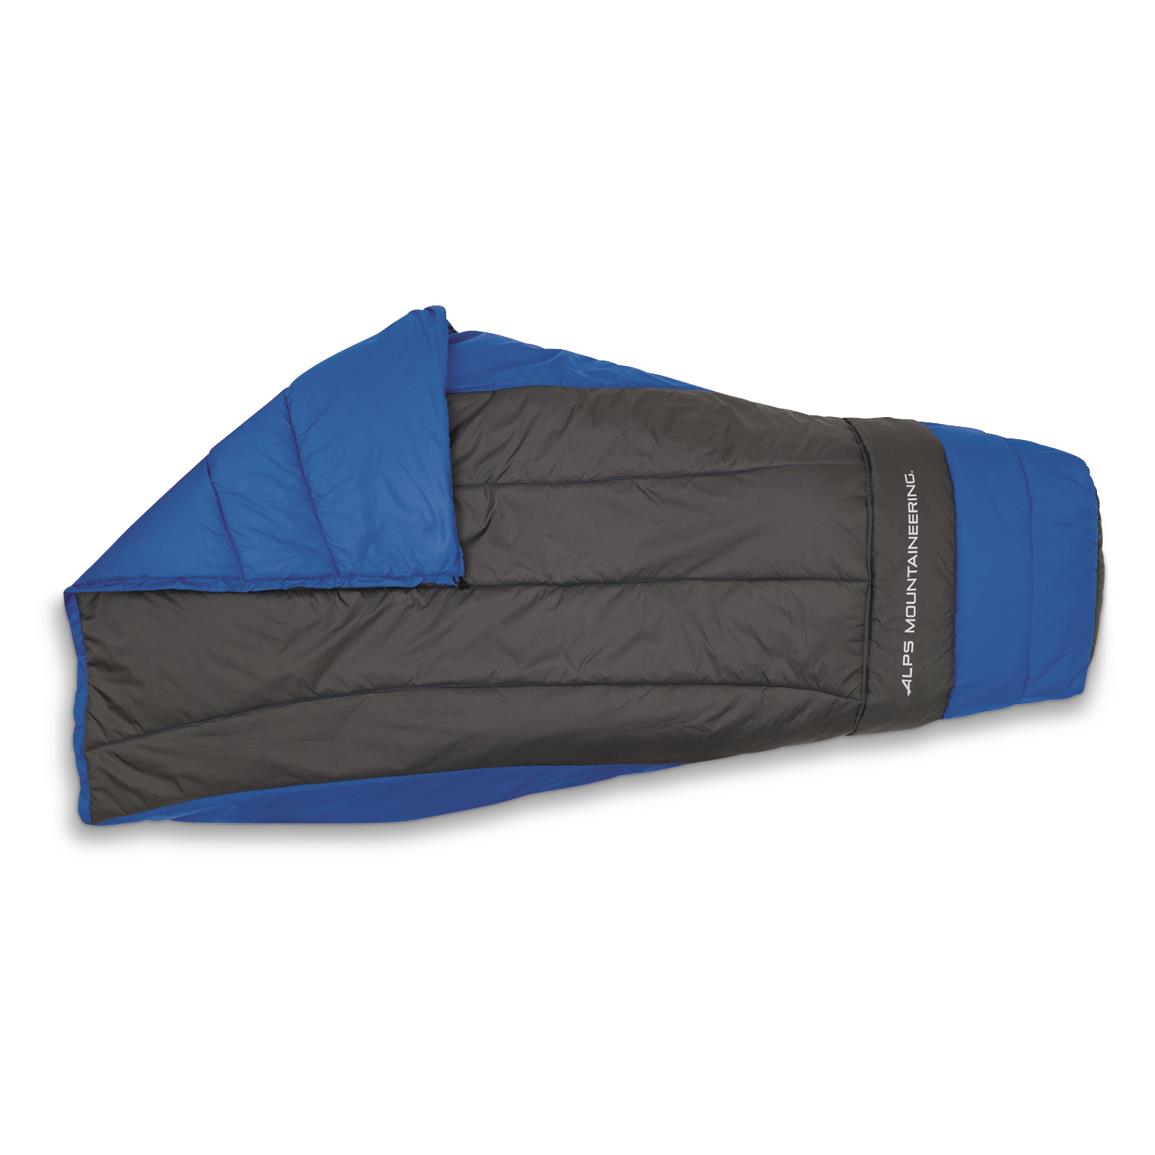 ALPS Mountaineering Radiance Camp Quilt, Blue/charcoal